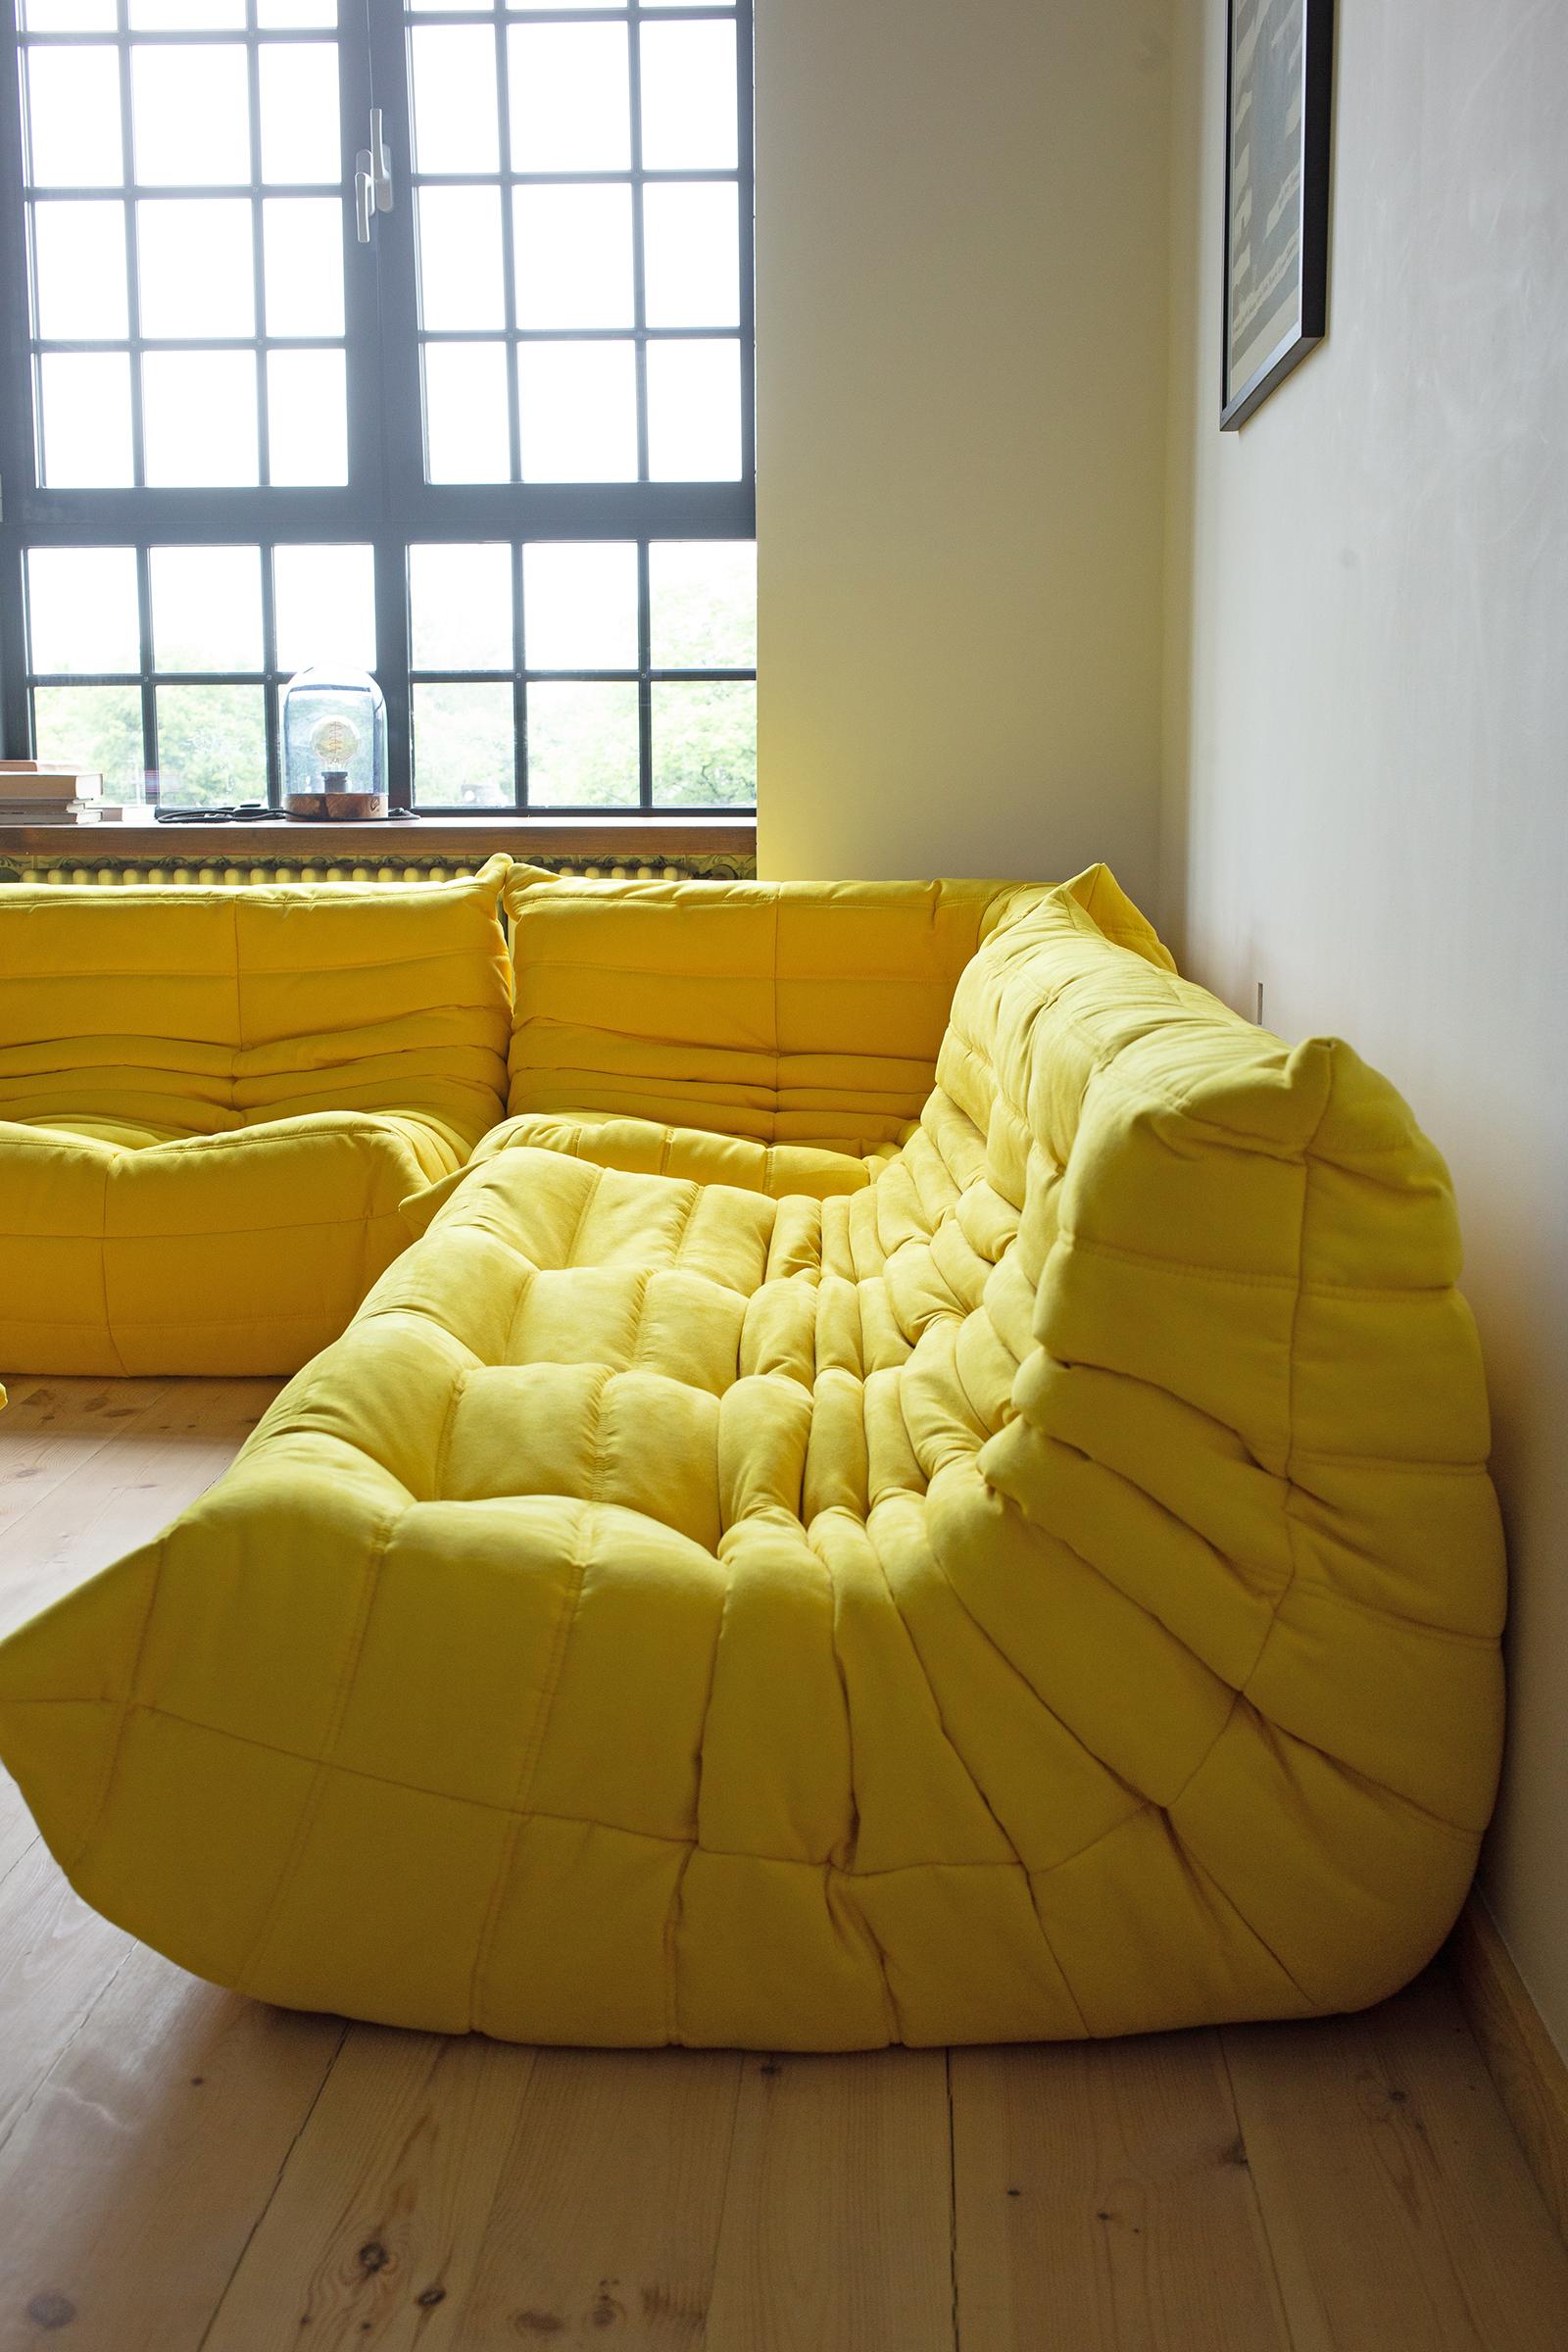 This Togo living room set was designed by Michel Ducaroy in 1973 and was manufactured by Ligne Roset in France. It has been reupholstered in new, great quality yellow microfiber and is made up of the following pieces: One three-seat couch (70 x 174